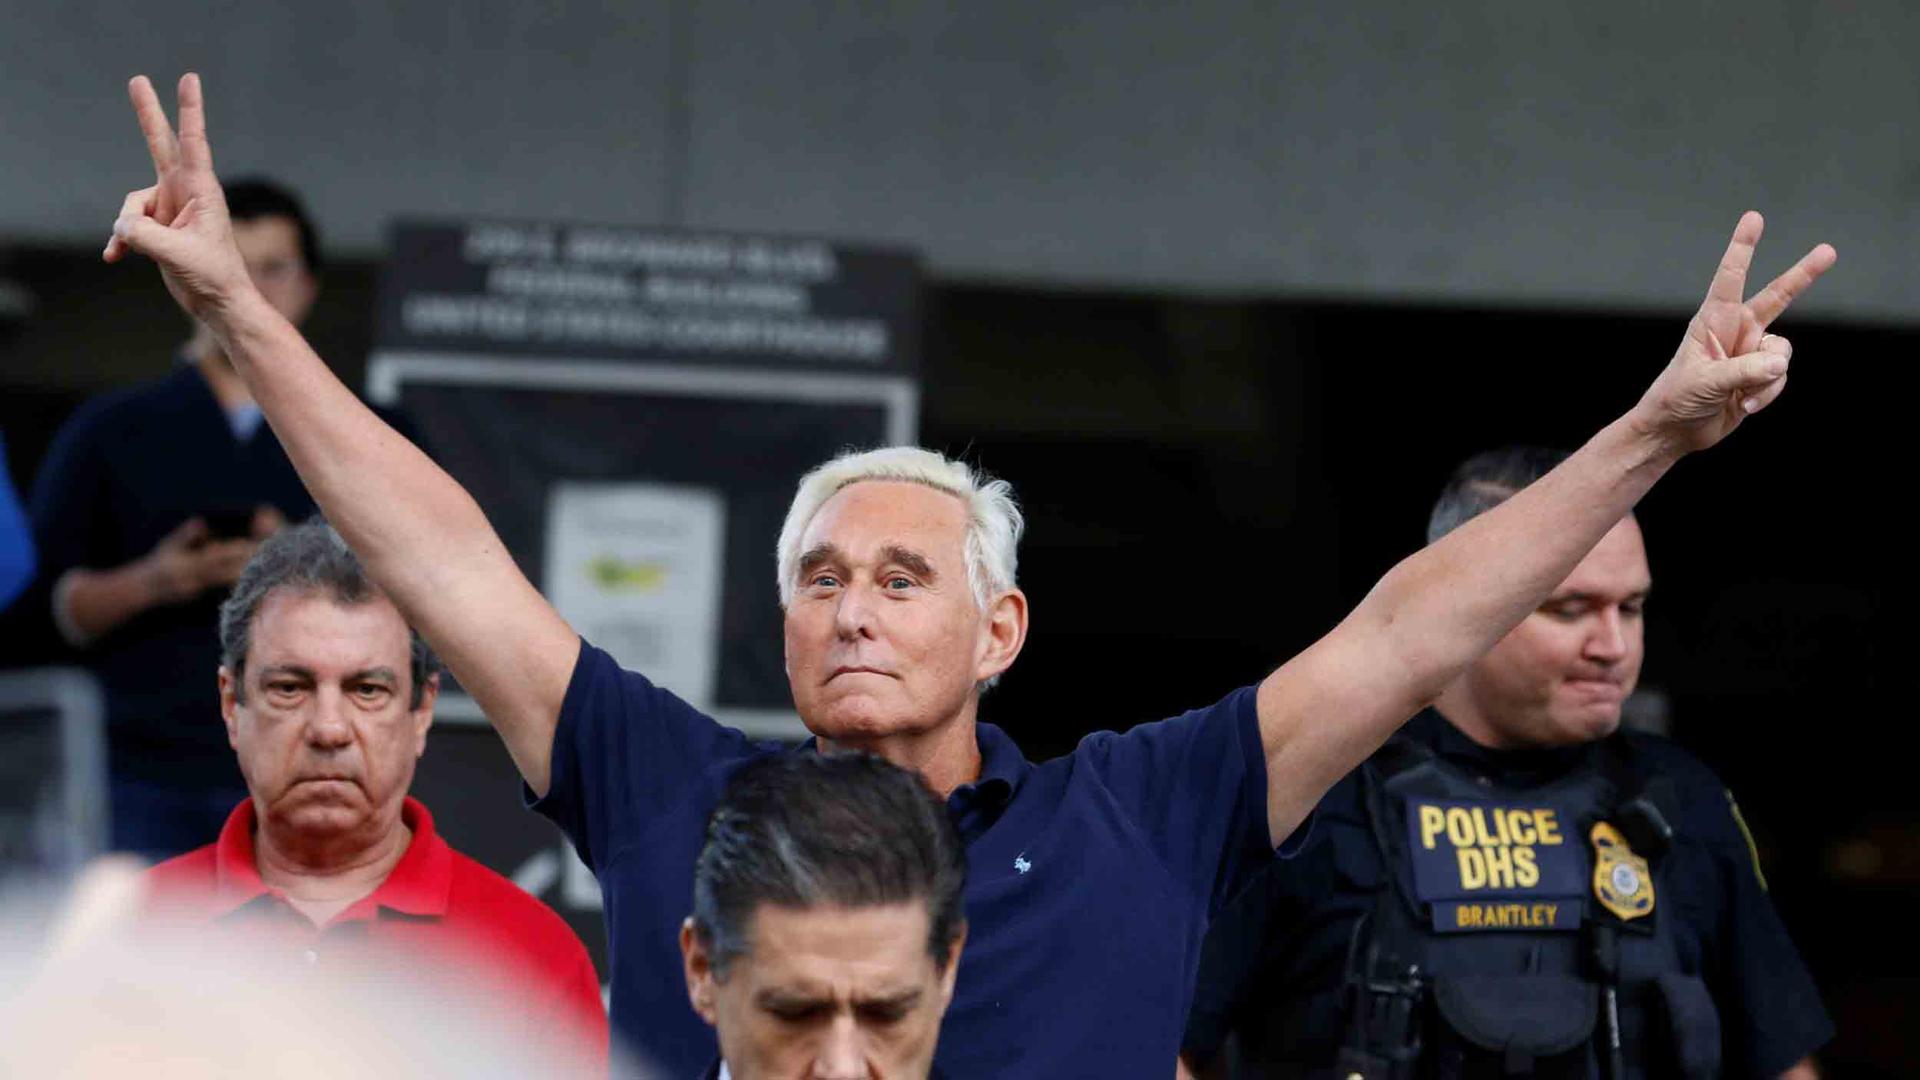 Roger Stone puts his hands up and makes peace signs as he walks to microphones